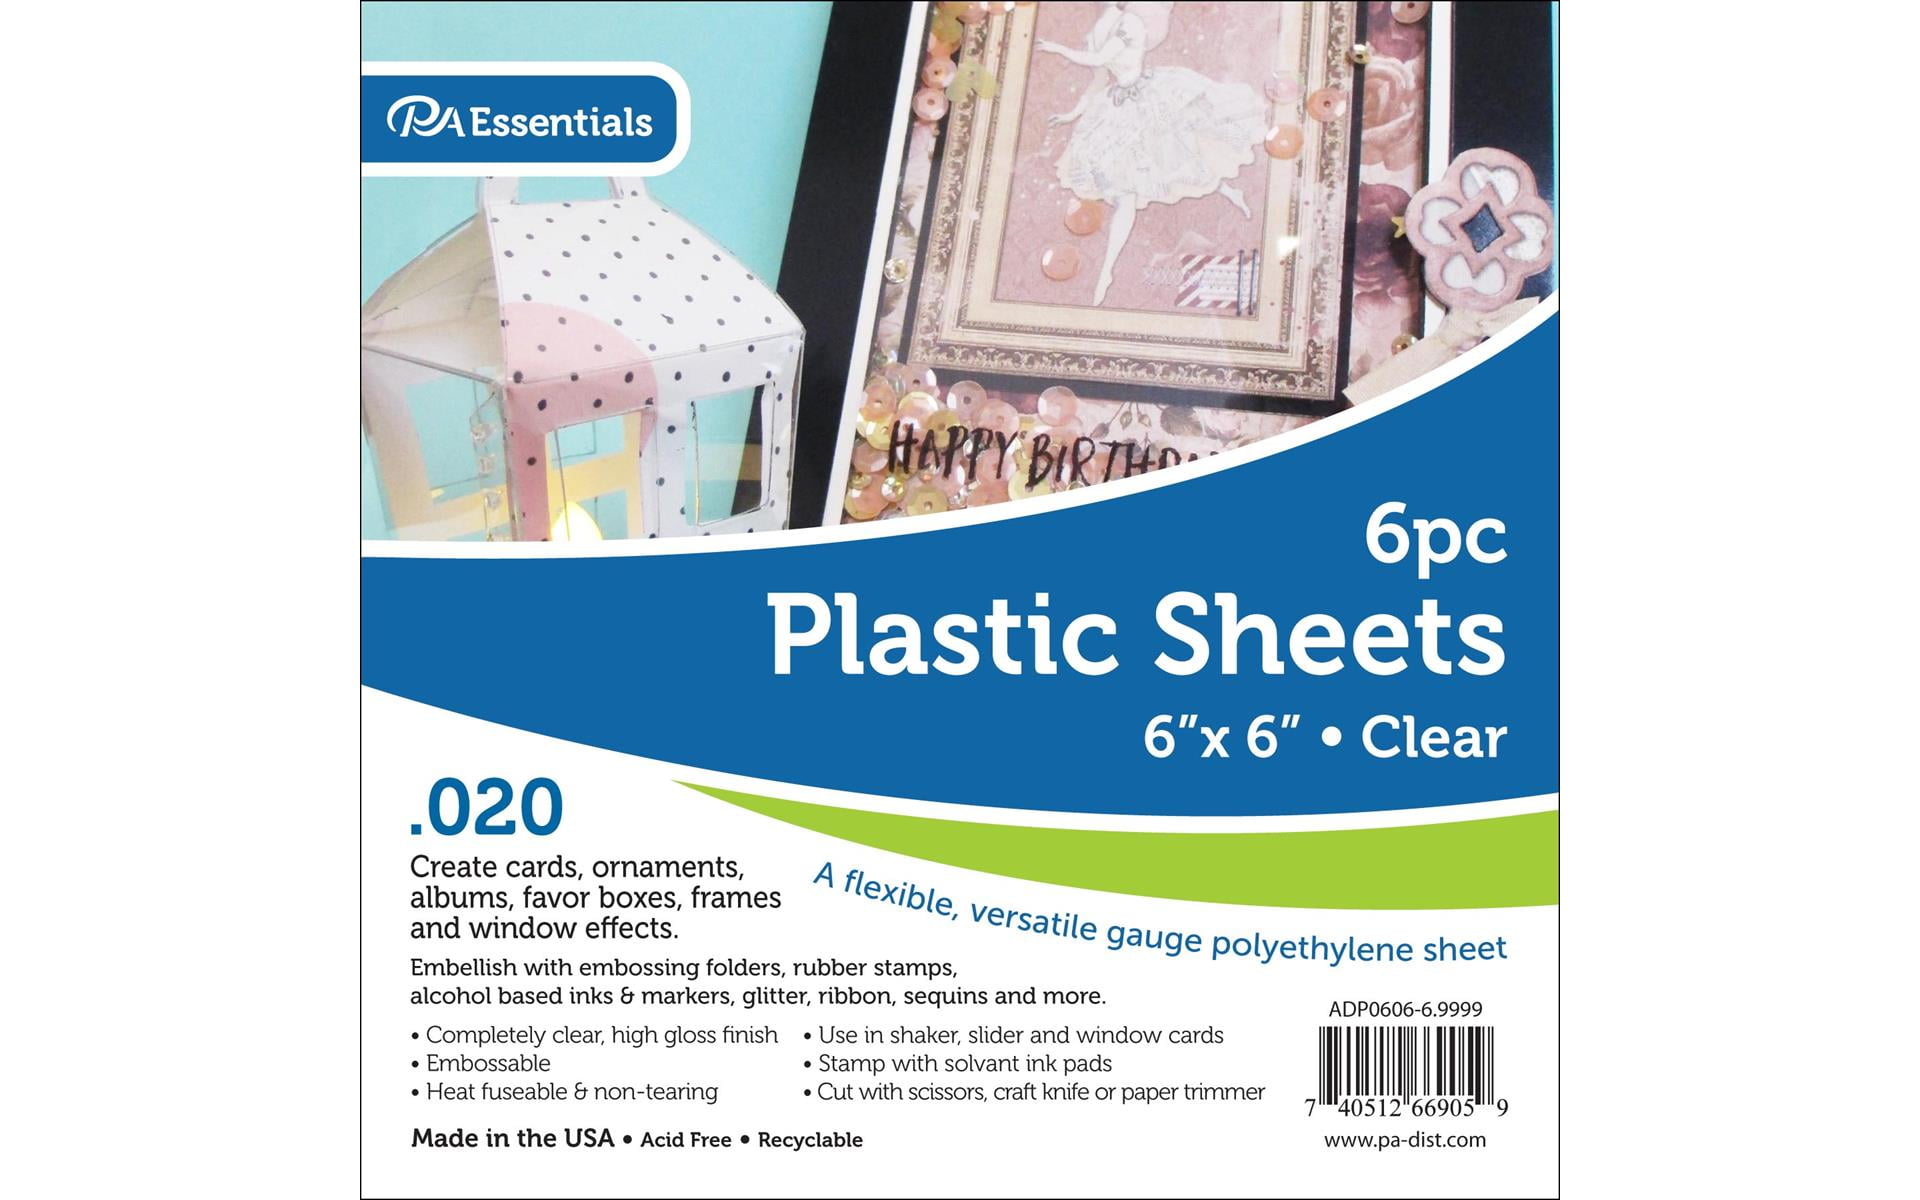 Sizzix Making Essential - Thermoplastic Sheets - 6 x 6, Clear, 6 Sheets